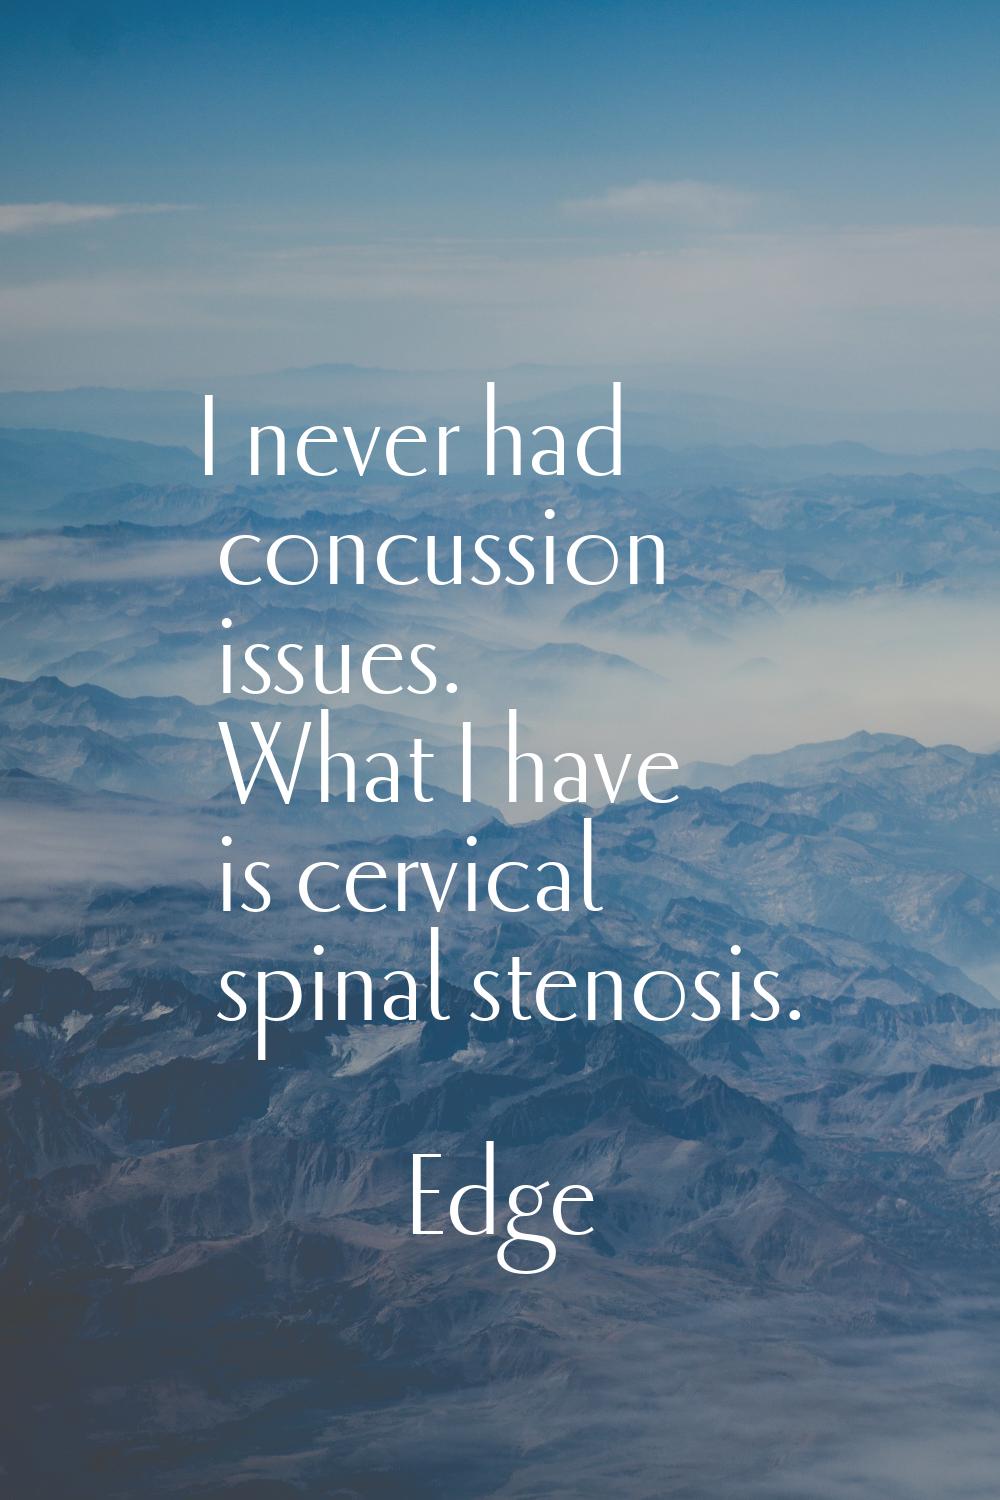 I never had concussion issues. What I have is cervical spinal stenosis.